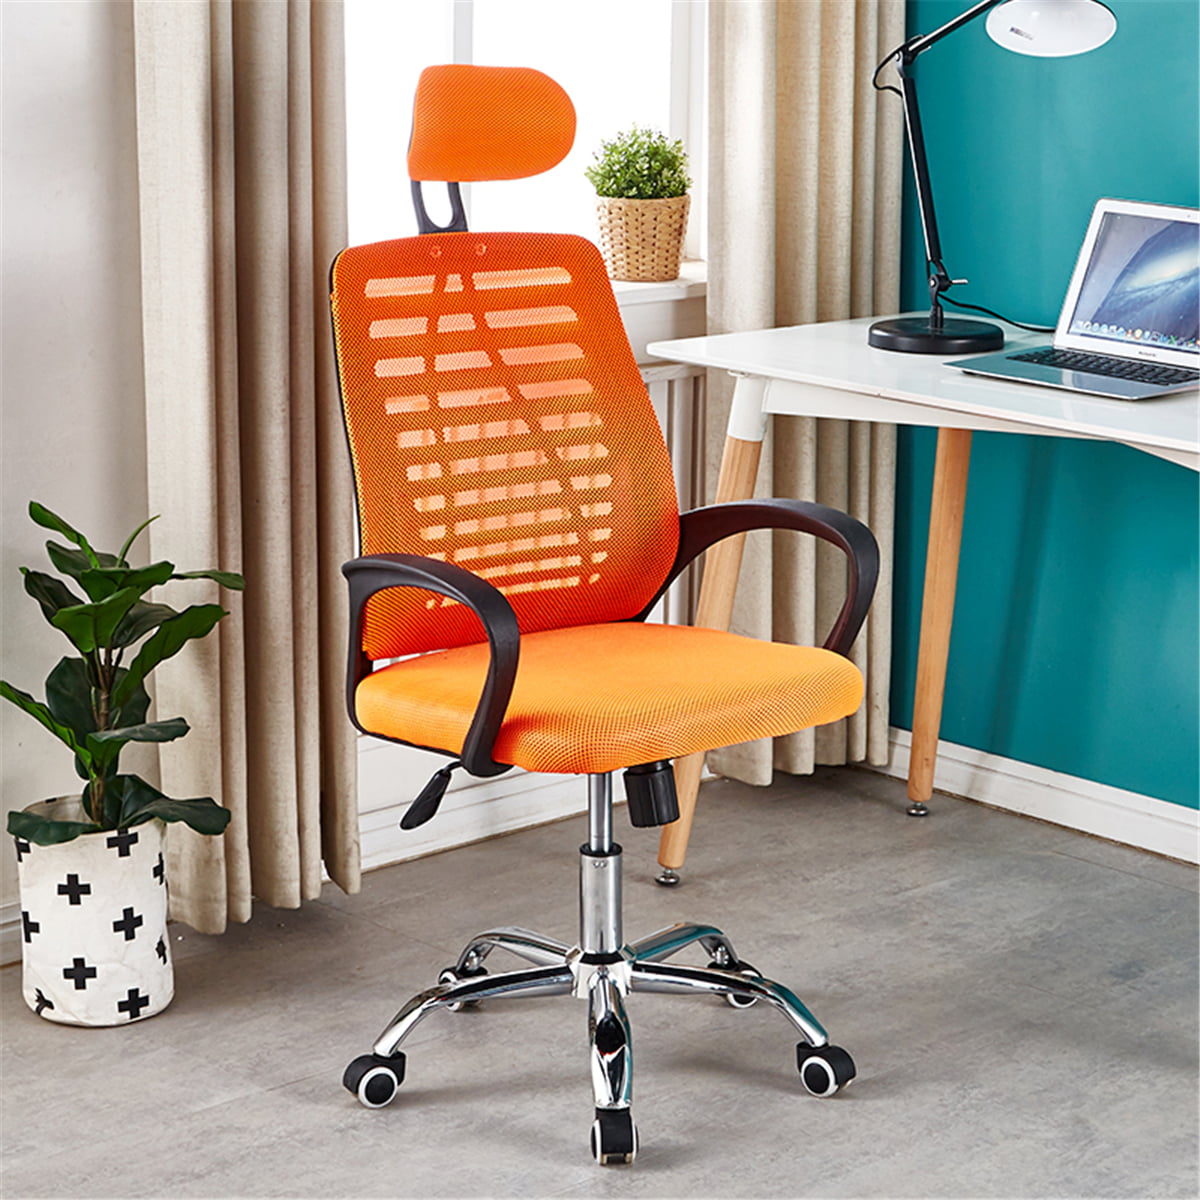 Office Mesh Chair Computer Desk Adjustable 360° Swivel Padded Seat Fabric Lift